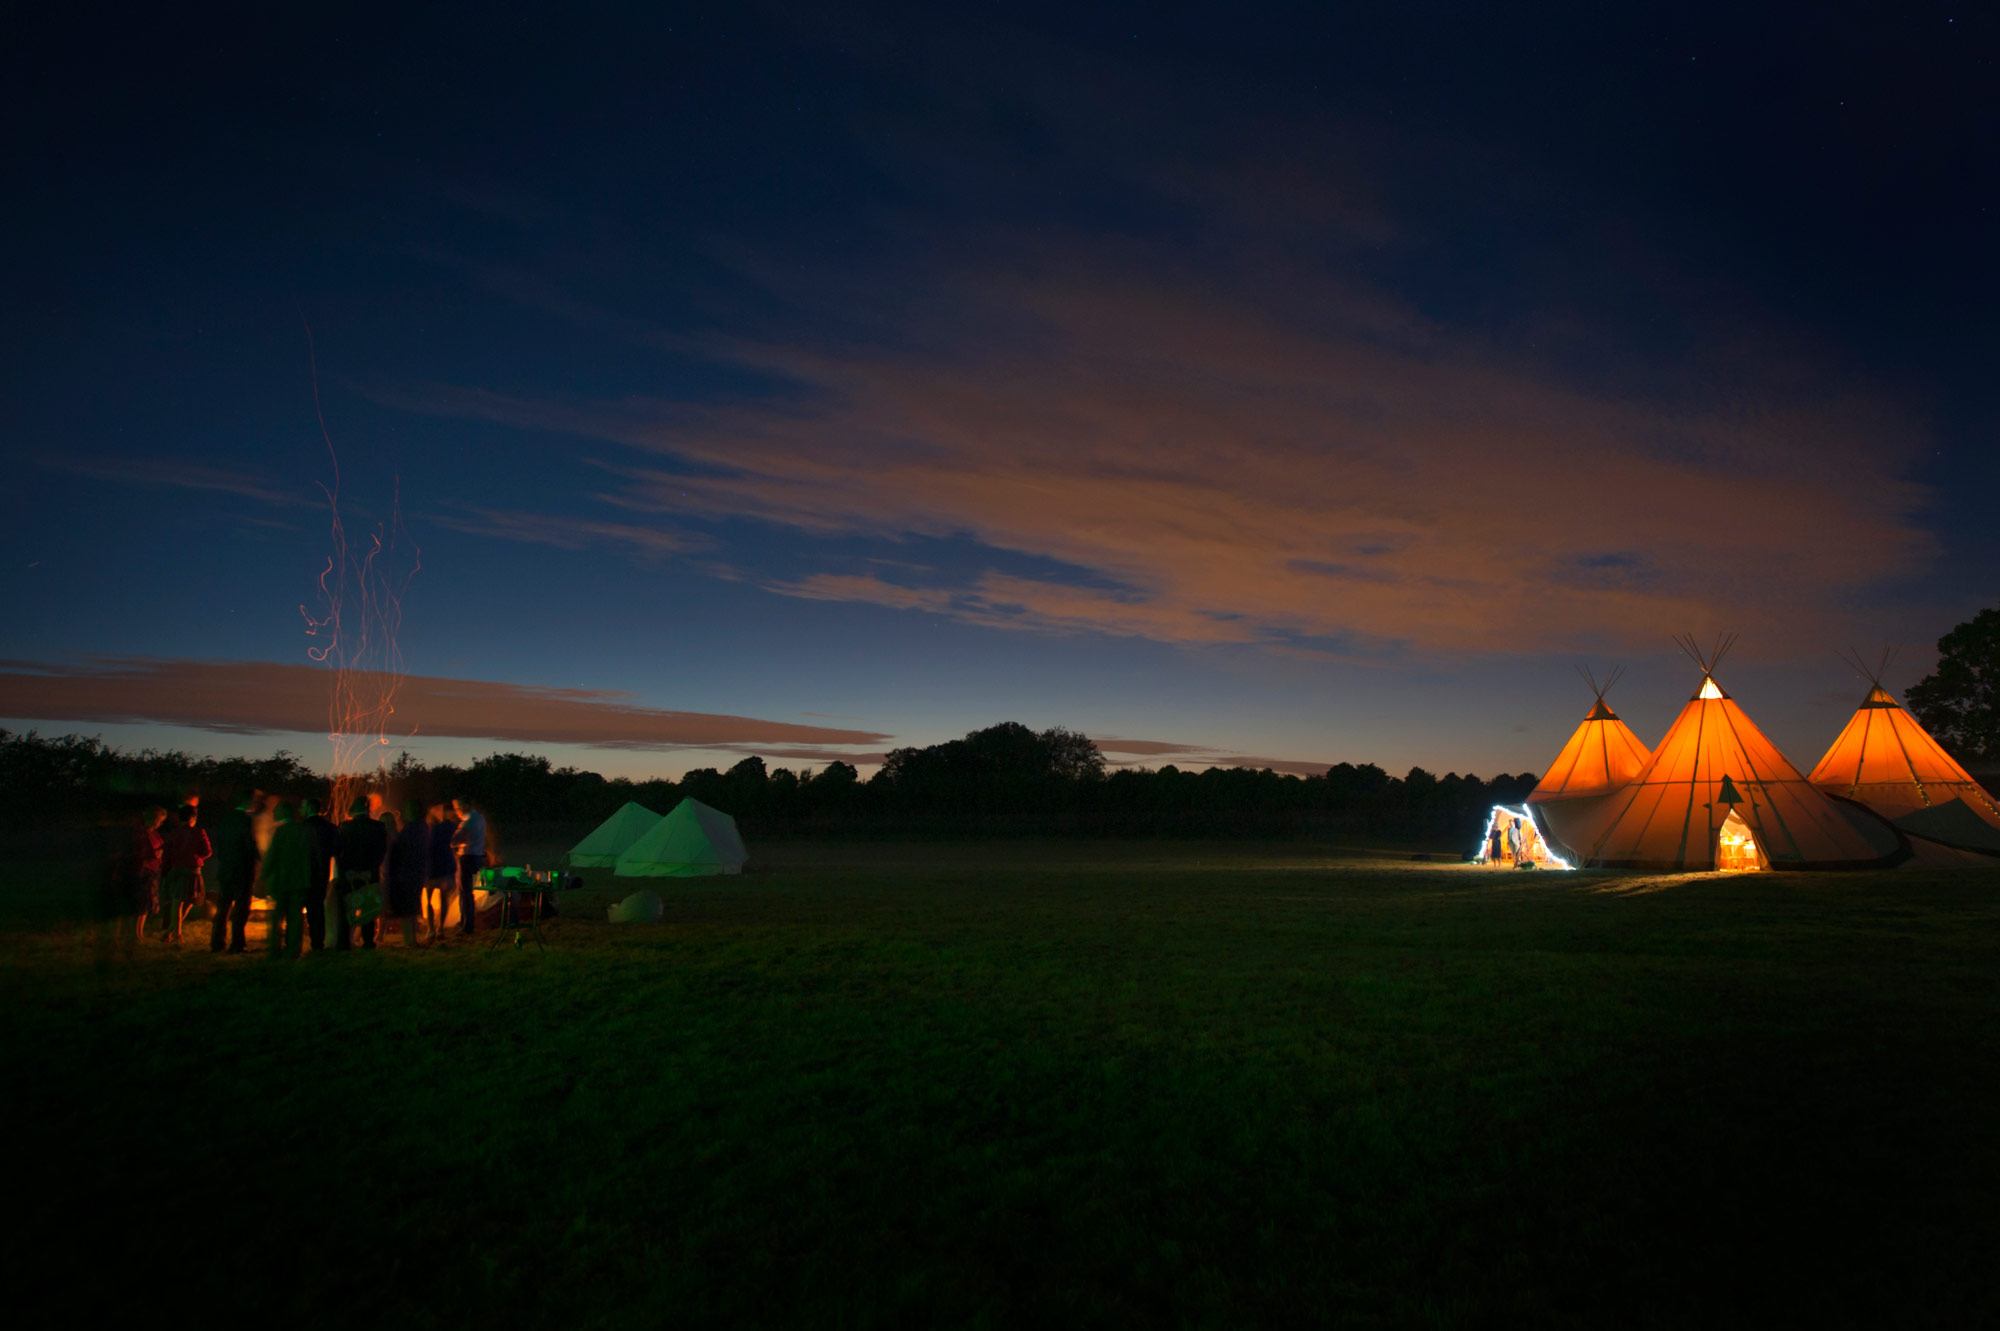 Tee pees and bonfire after dark at outdoor wedding to illustrate Sussex wedding photogrpaher reviews